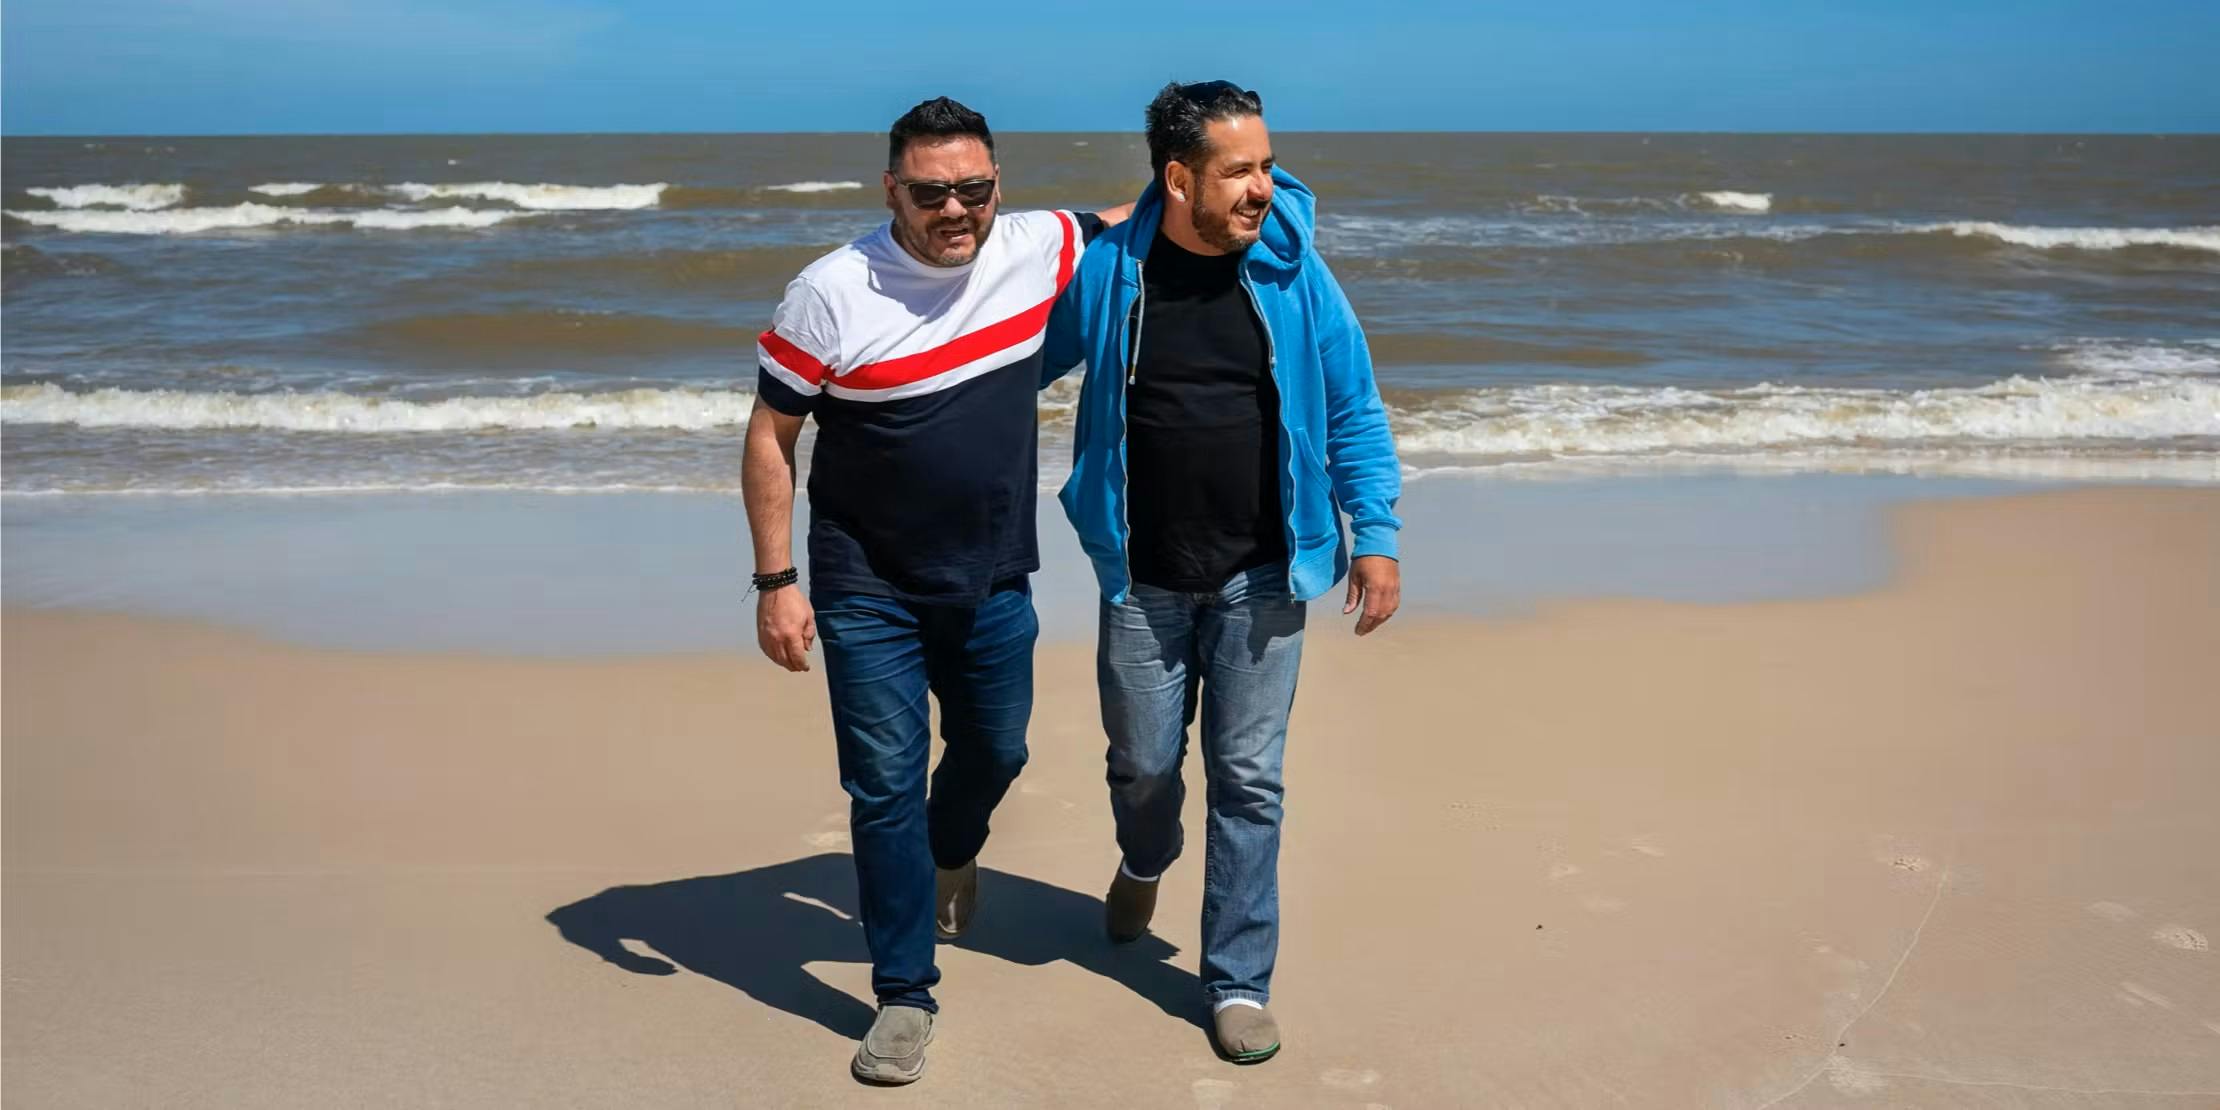 Two men walking together on a beach